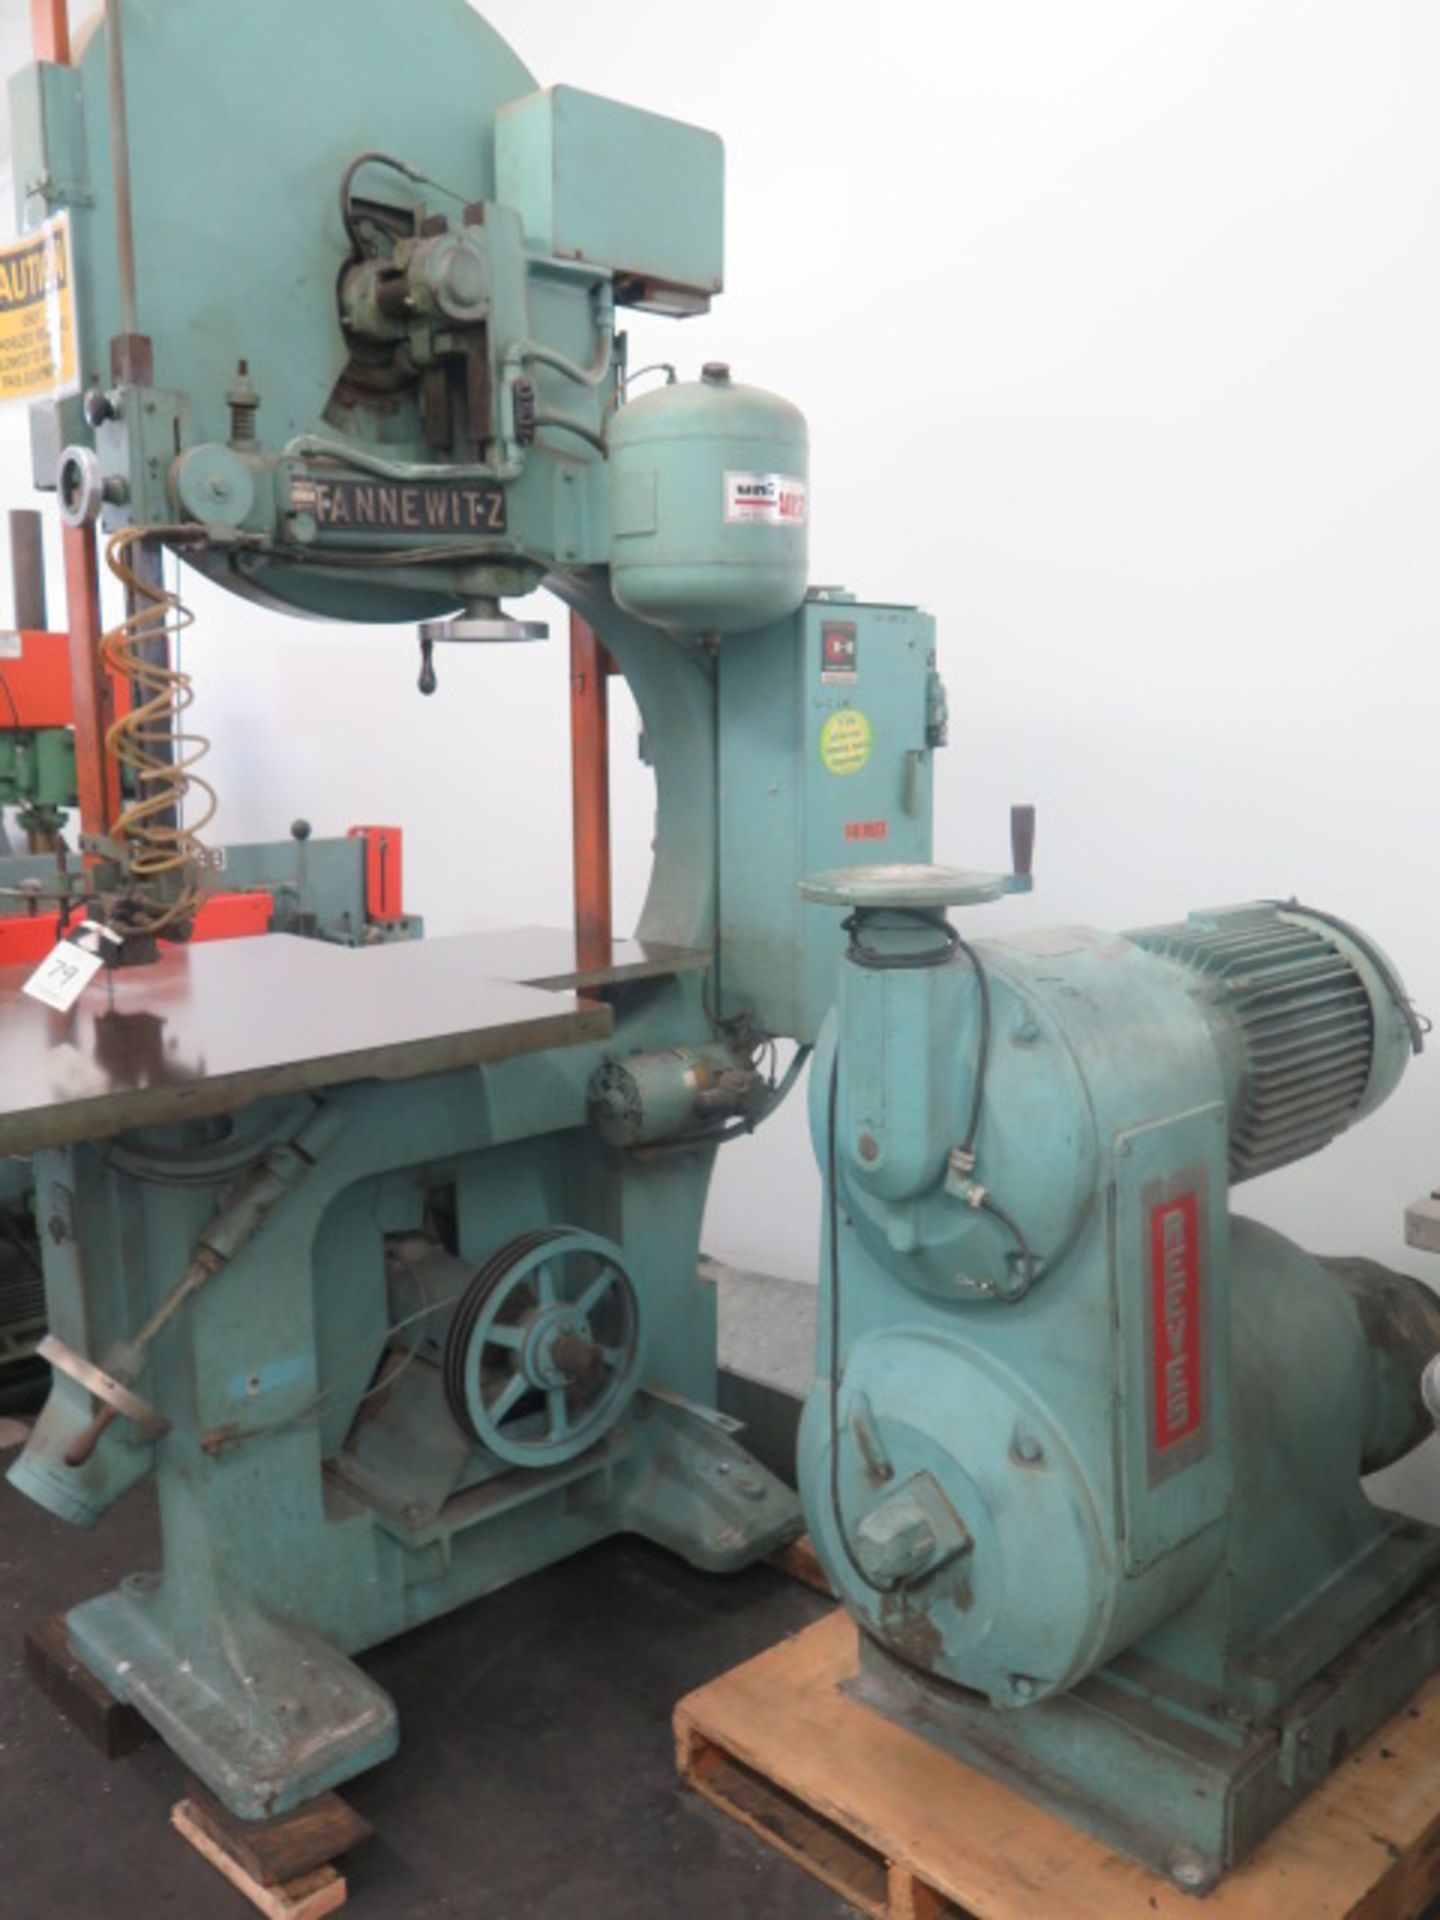 Tannewitz mdl. 6V1E 35” Vertical Band Saw s/n 83041 w/ Reeves Vari-Drive Speed Controller - Image 5 of 8